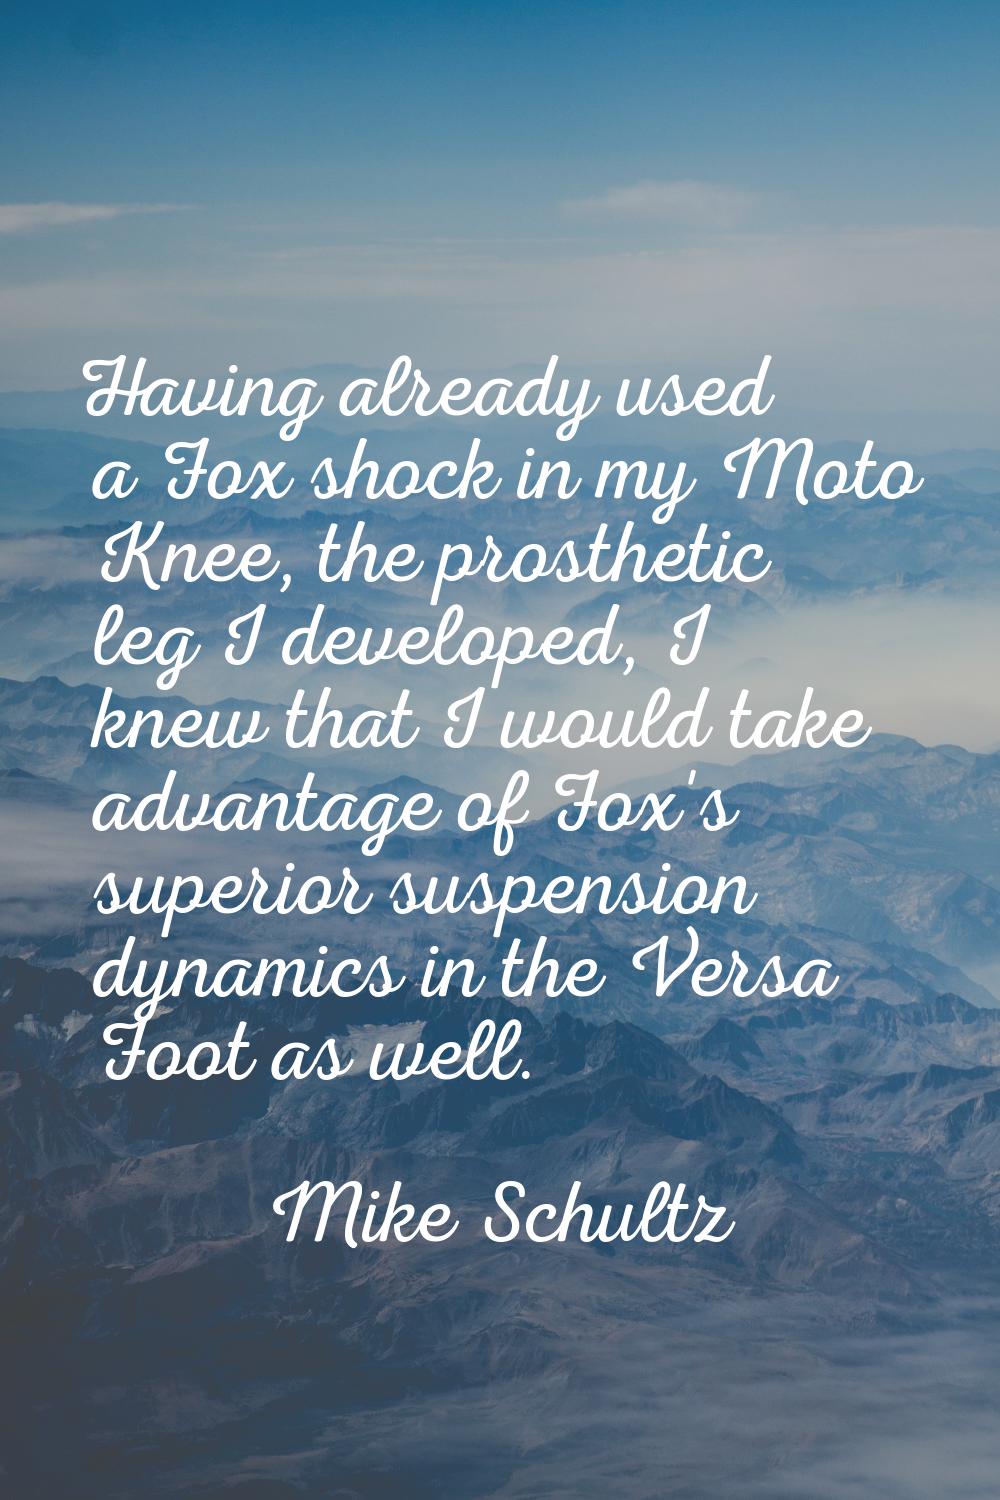 Having already used a Fox shock in my Moto Knee, the prosthetic leg I developed, I knew that I woul